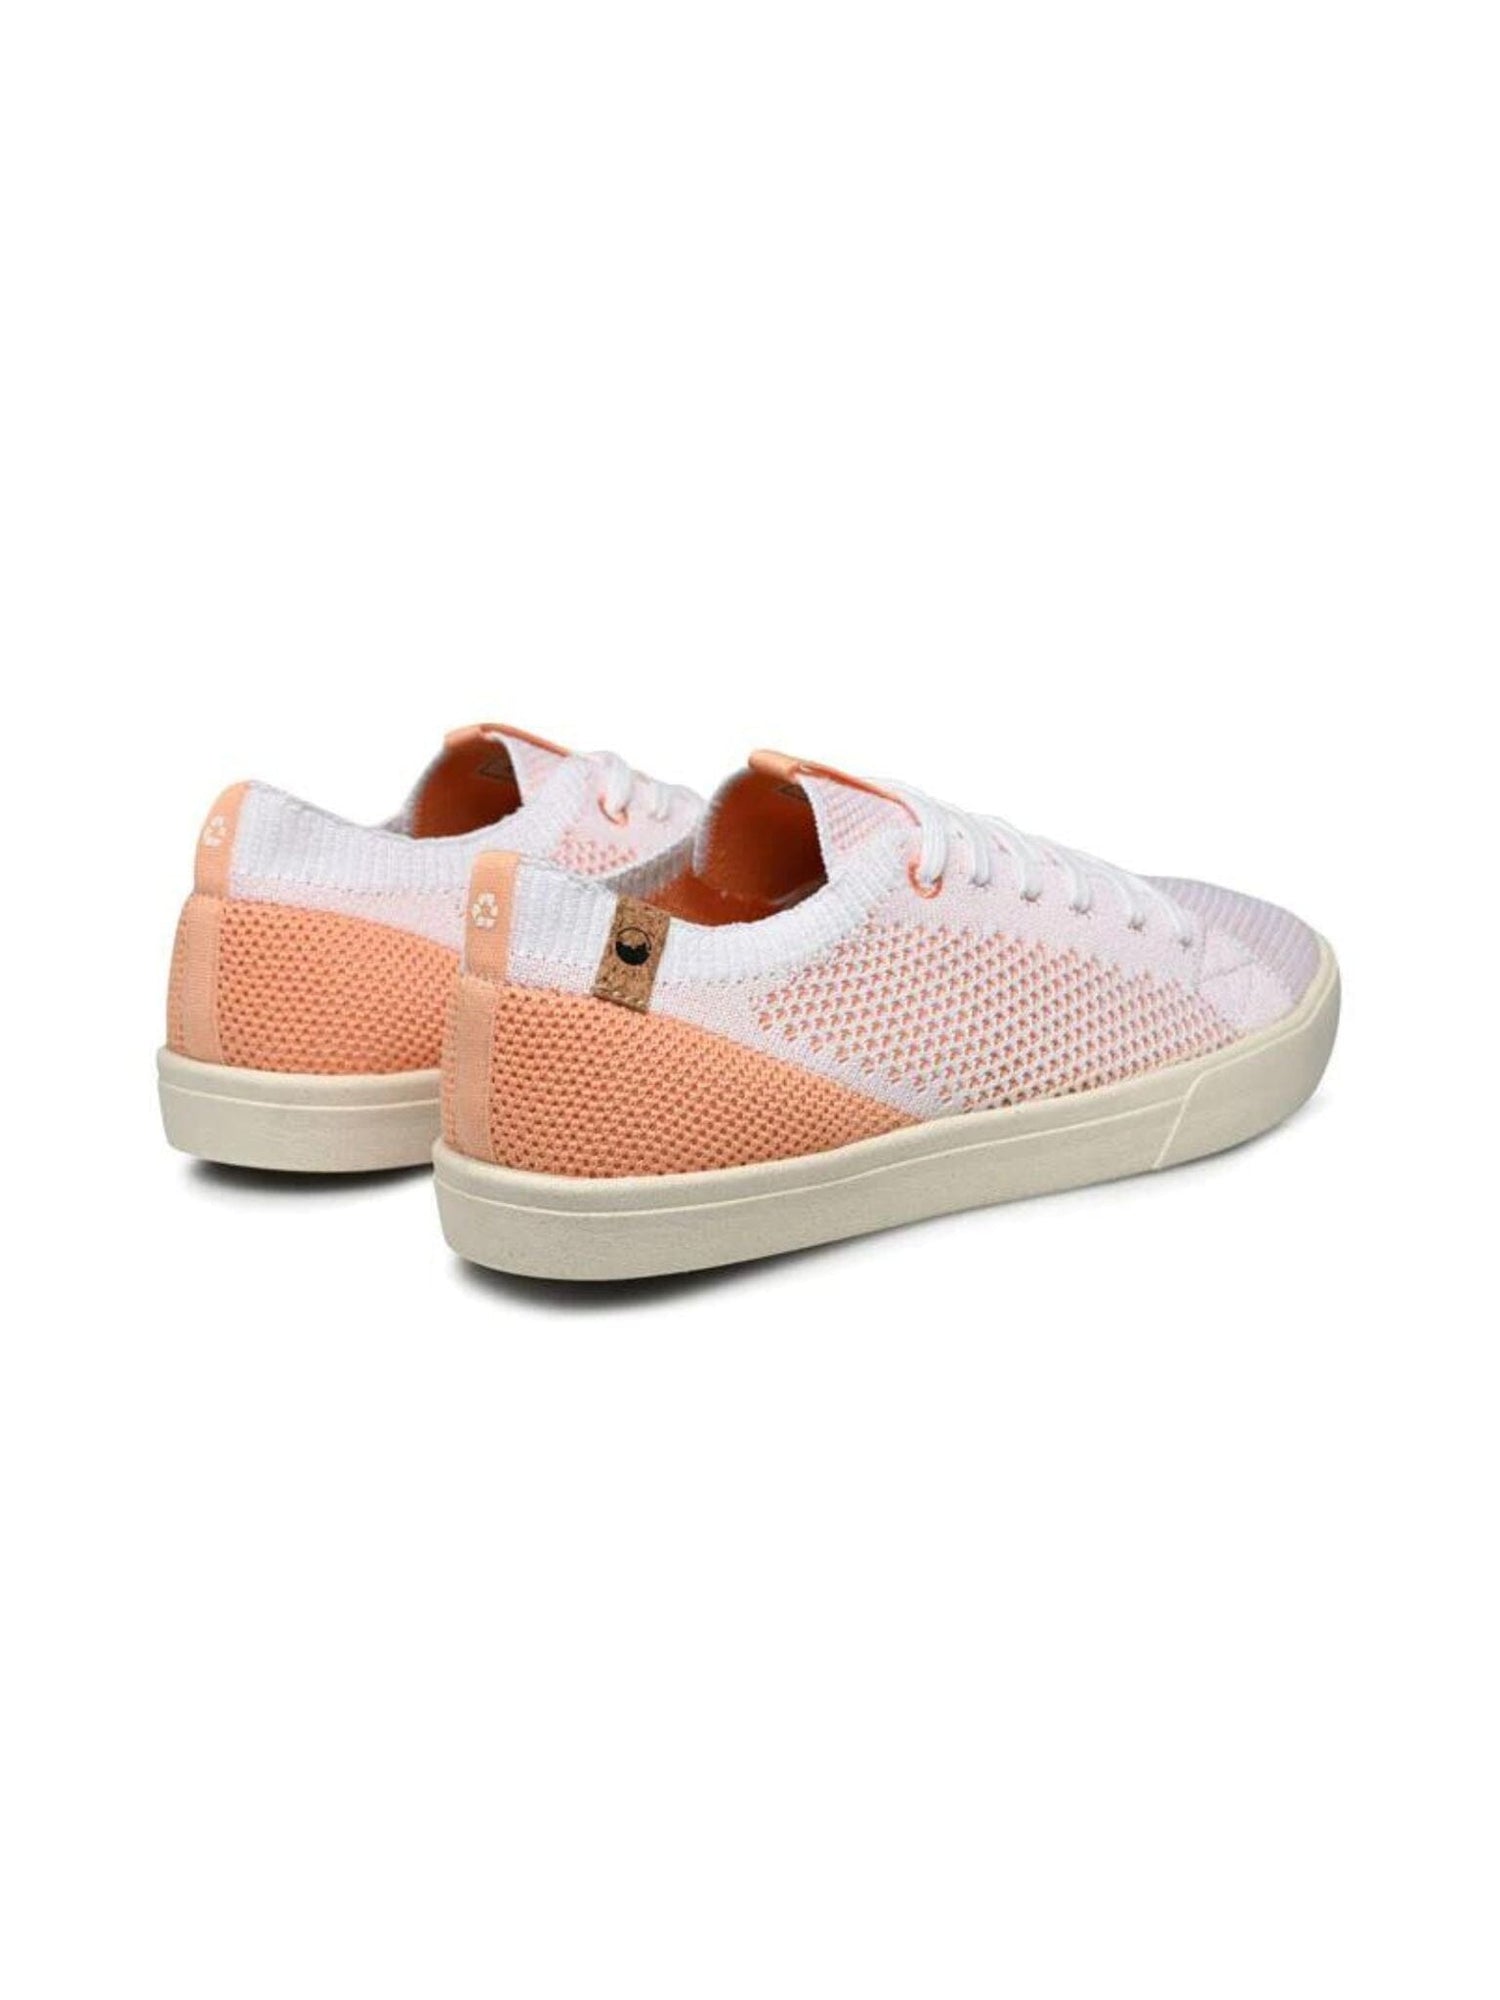 Saola W's Cannon Knit - Recycled PET White Peach Shoes